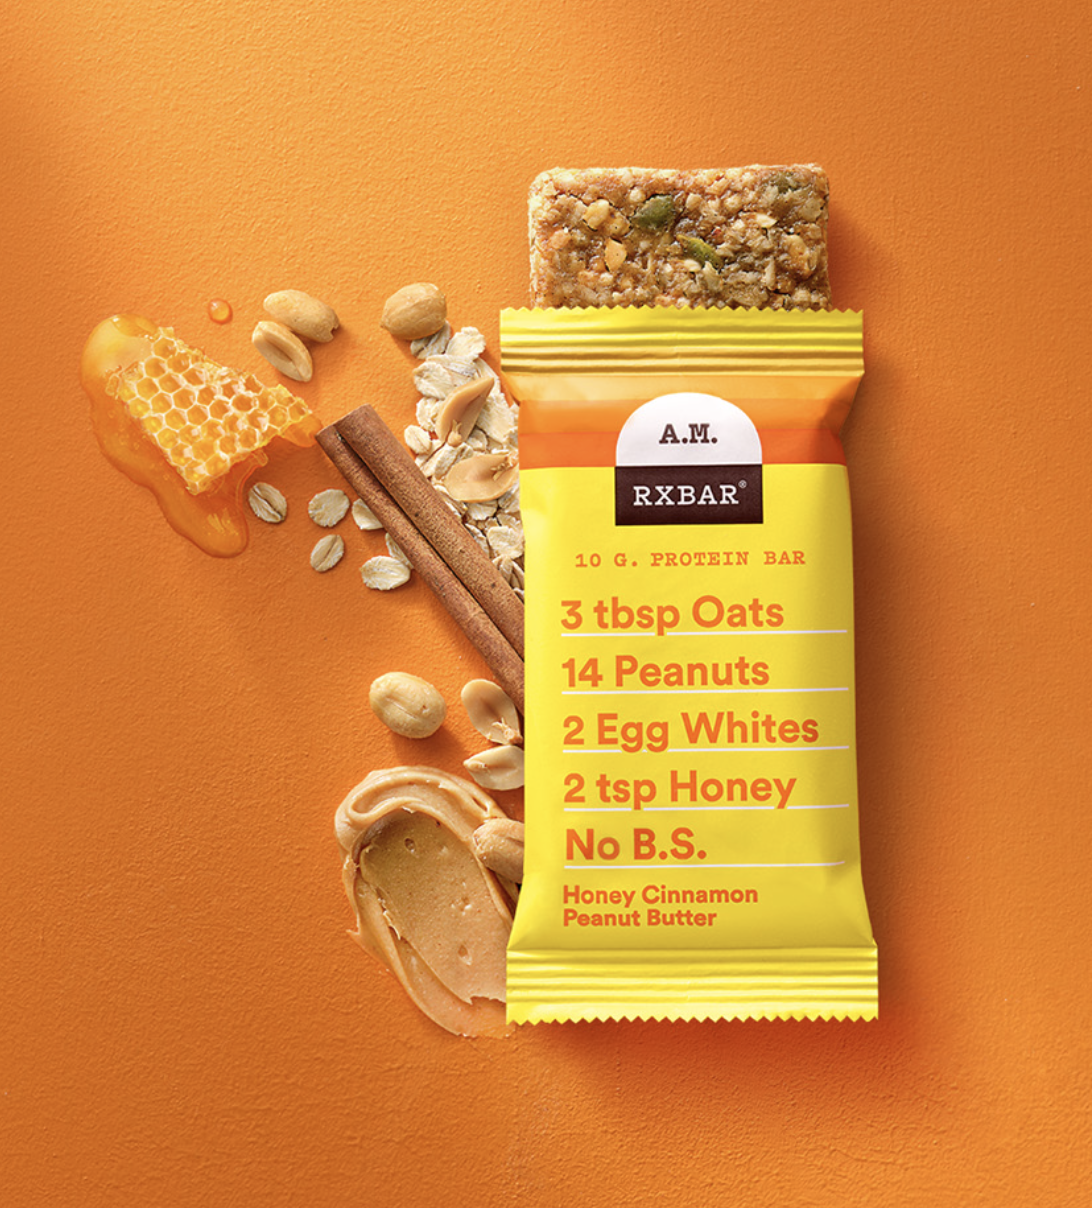 RXBAR is CPG Packaging guide's one of the case study example